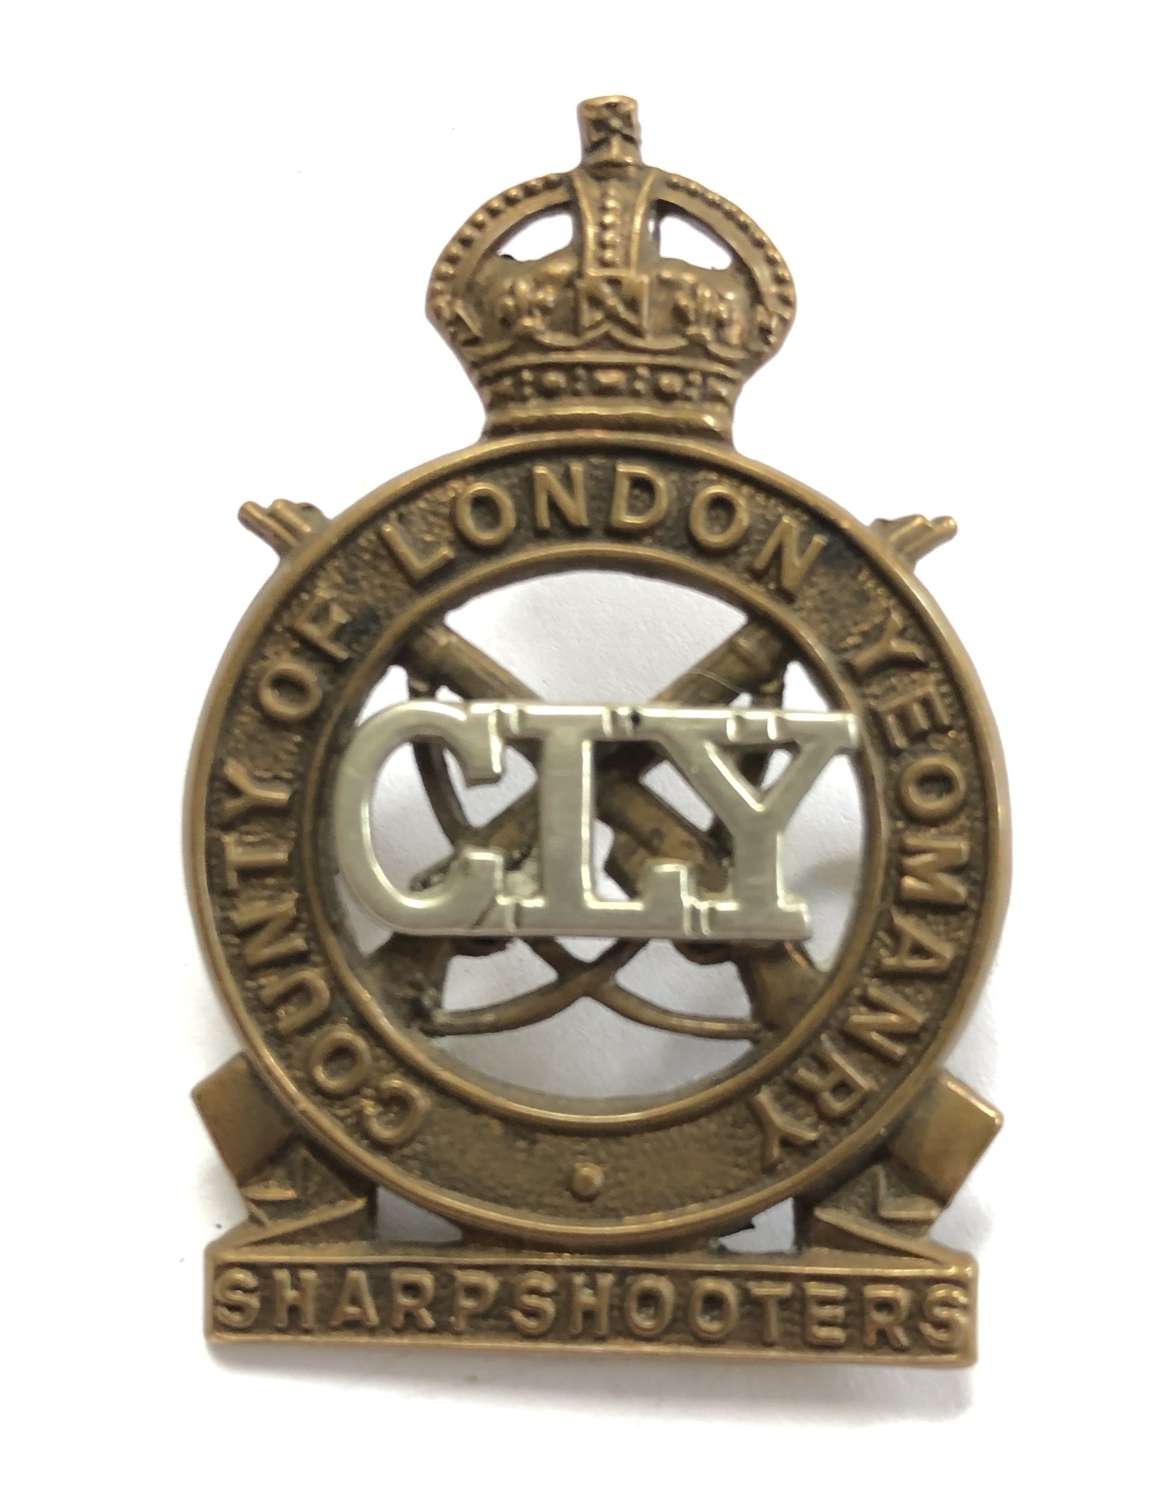 County of London Yeomanry Sharpshooters post 1940 cap badge